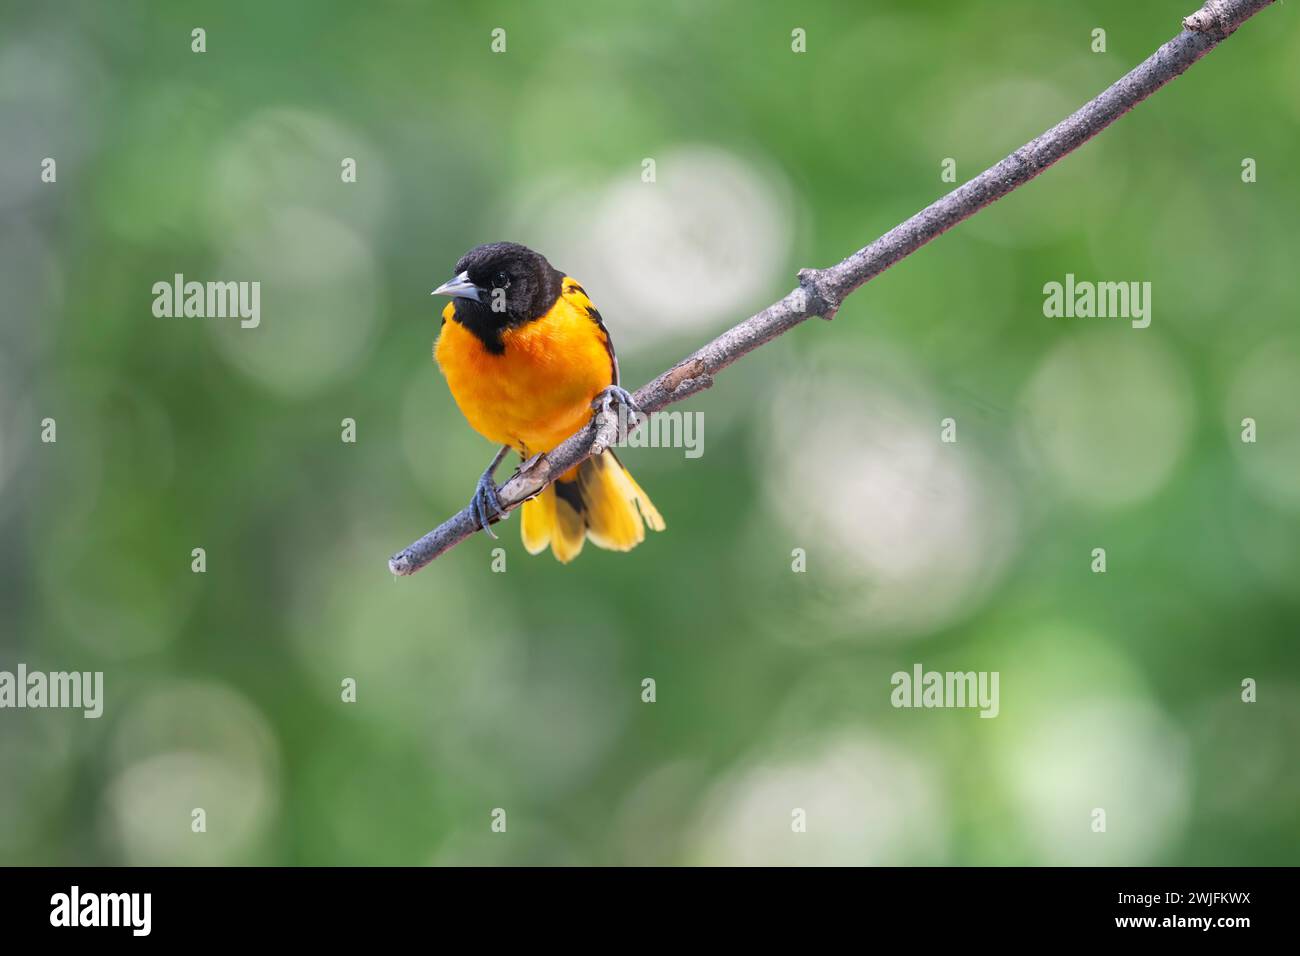 Baltimore oriole, Icterus galbula, on tree branch in Spring, Brownsburg-Chatham, Quebec Stock Photo